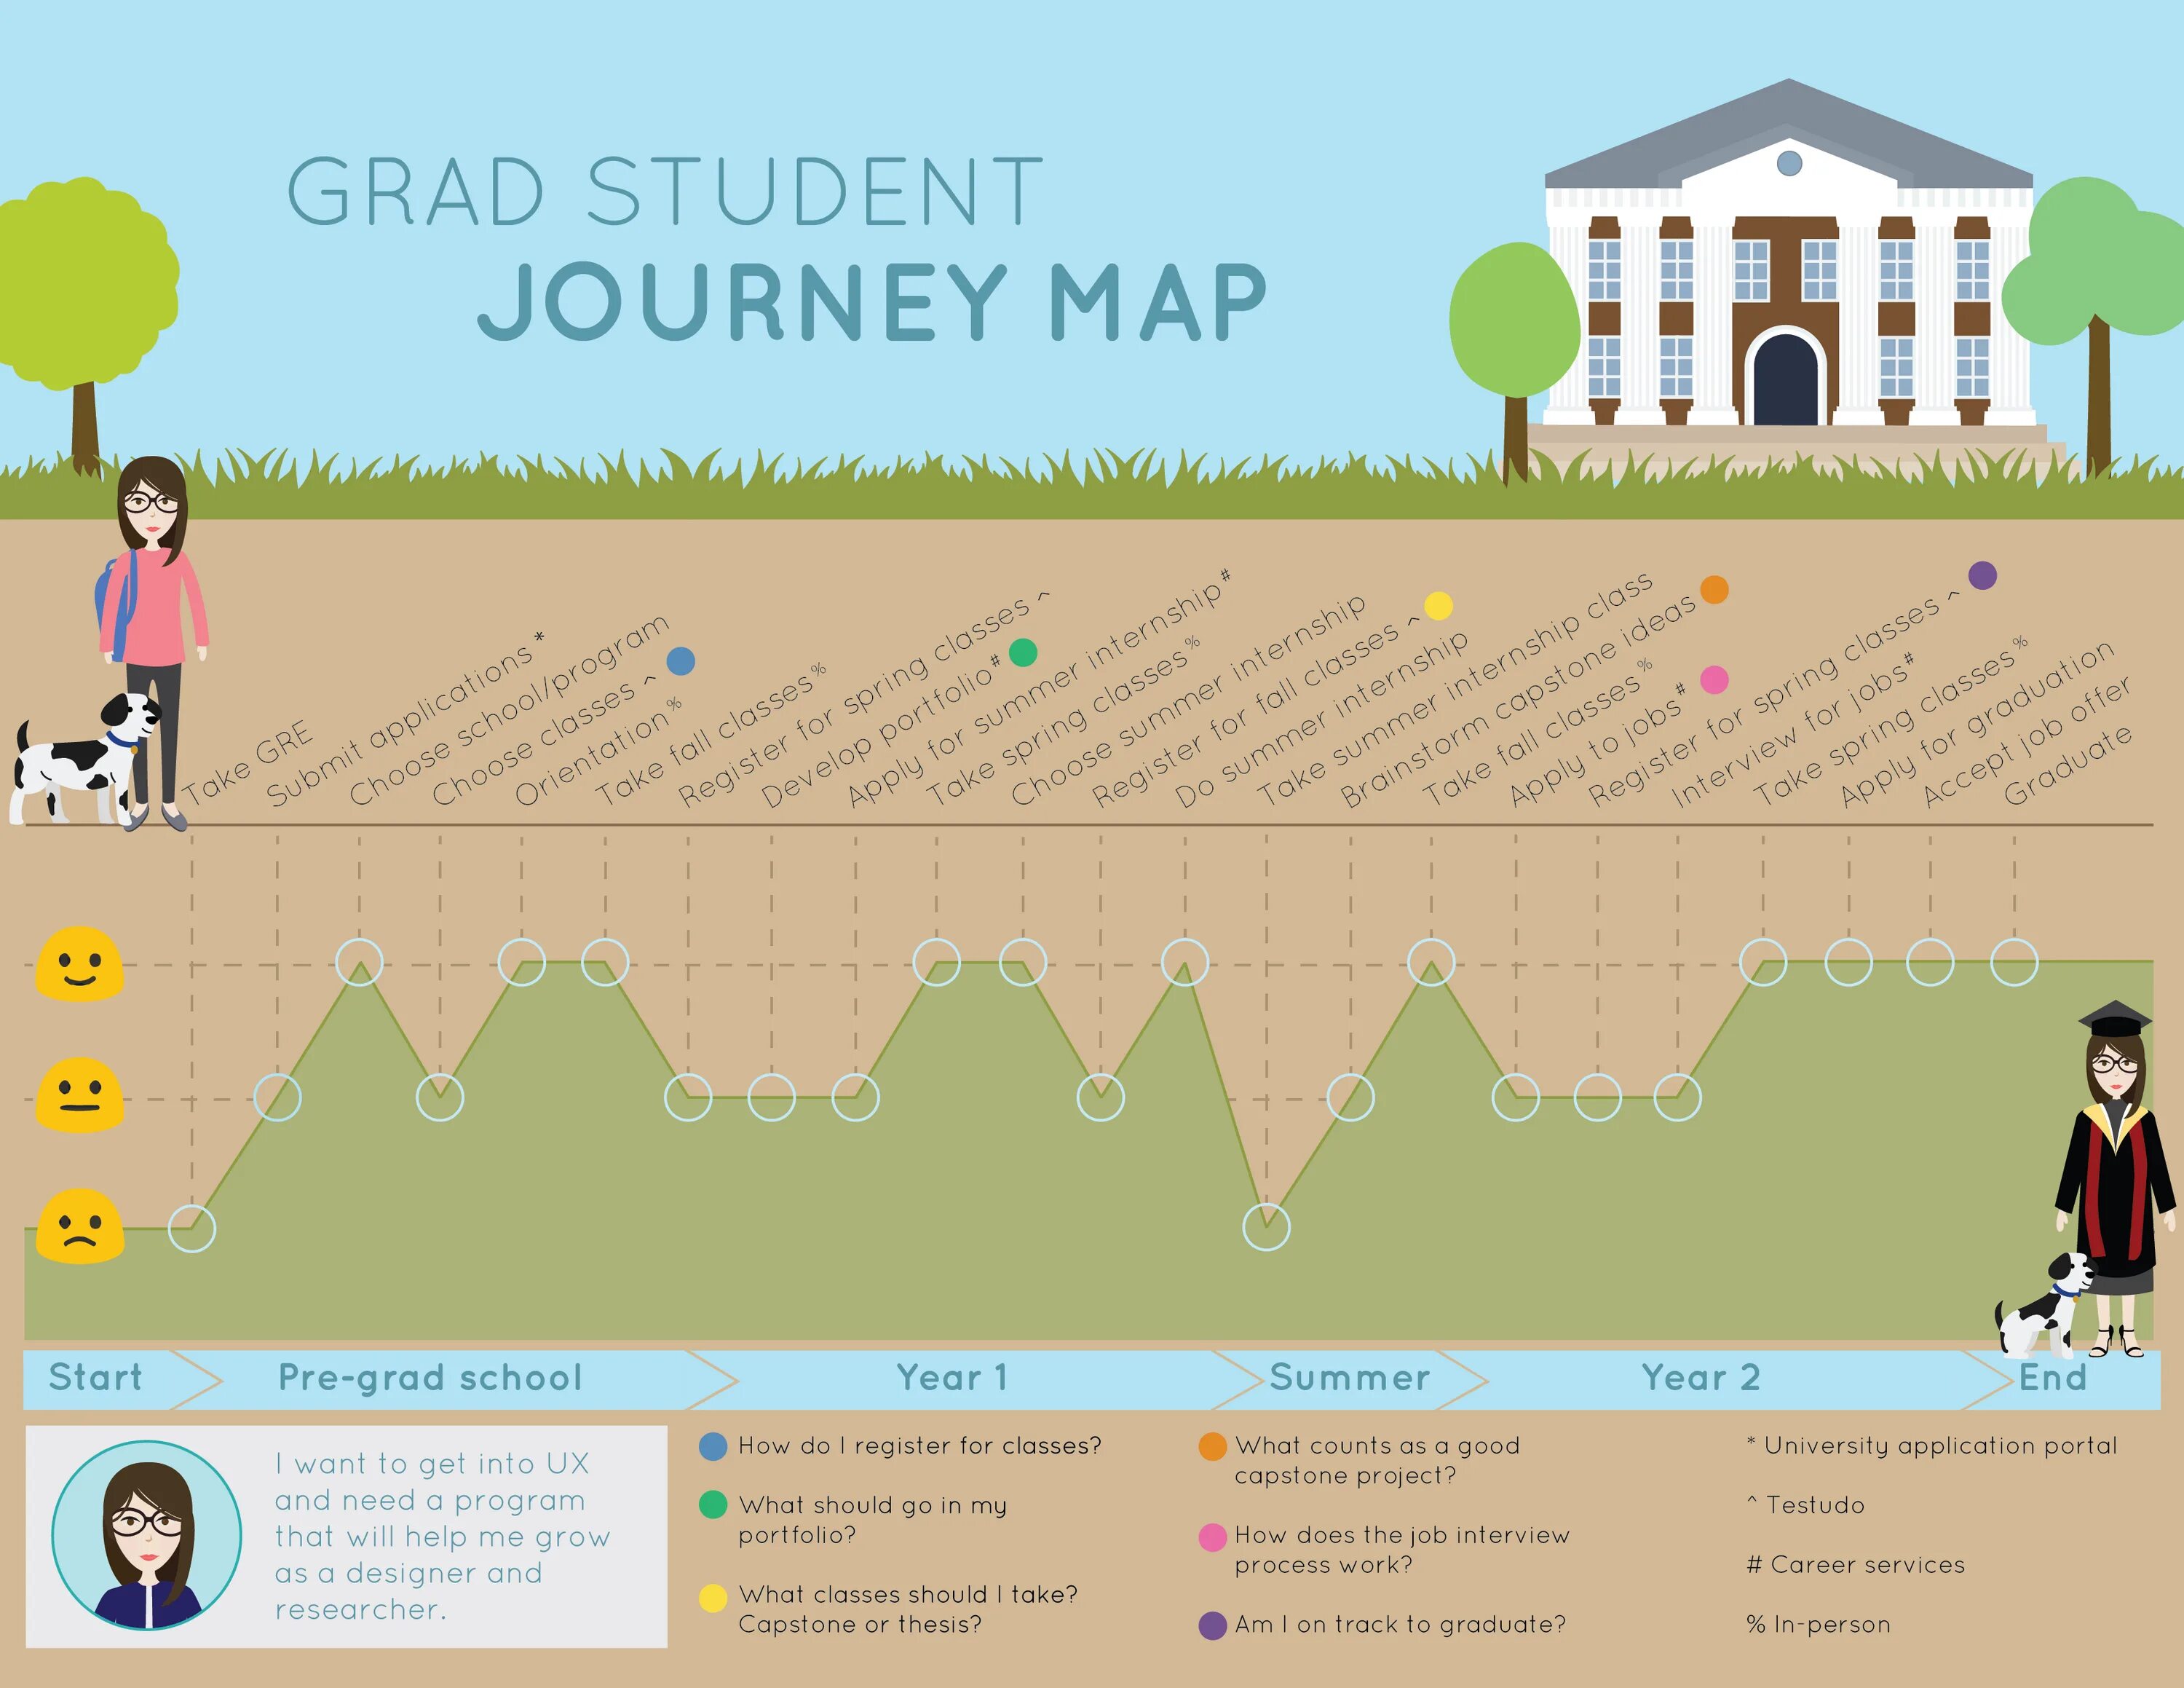 Student Journey Map. Learning Journey Map примеры. Student Journey Map примеры. Student Learning Journey. May journey